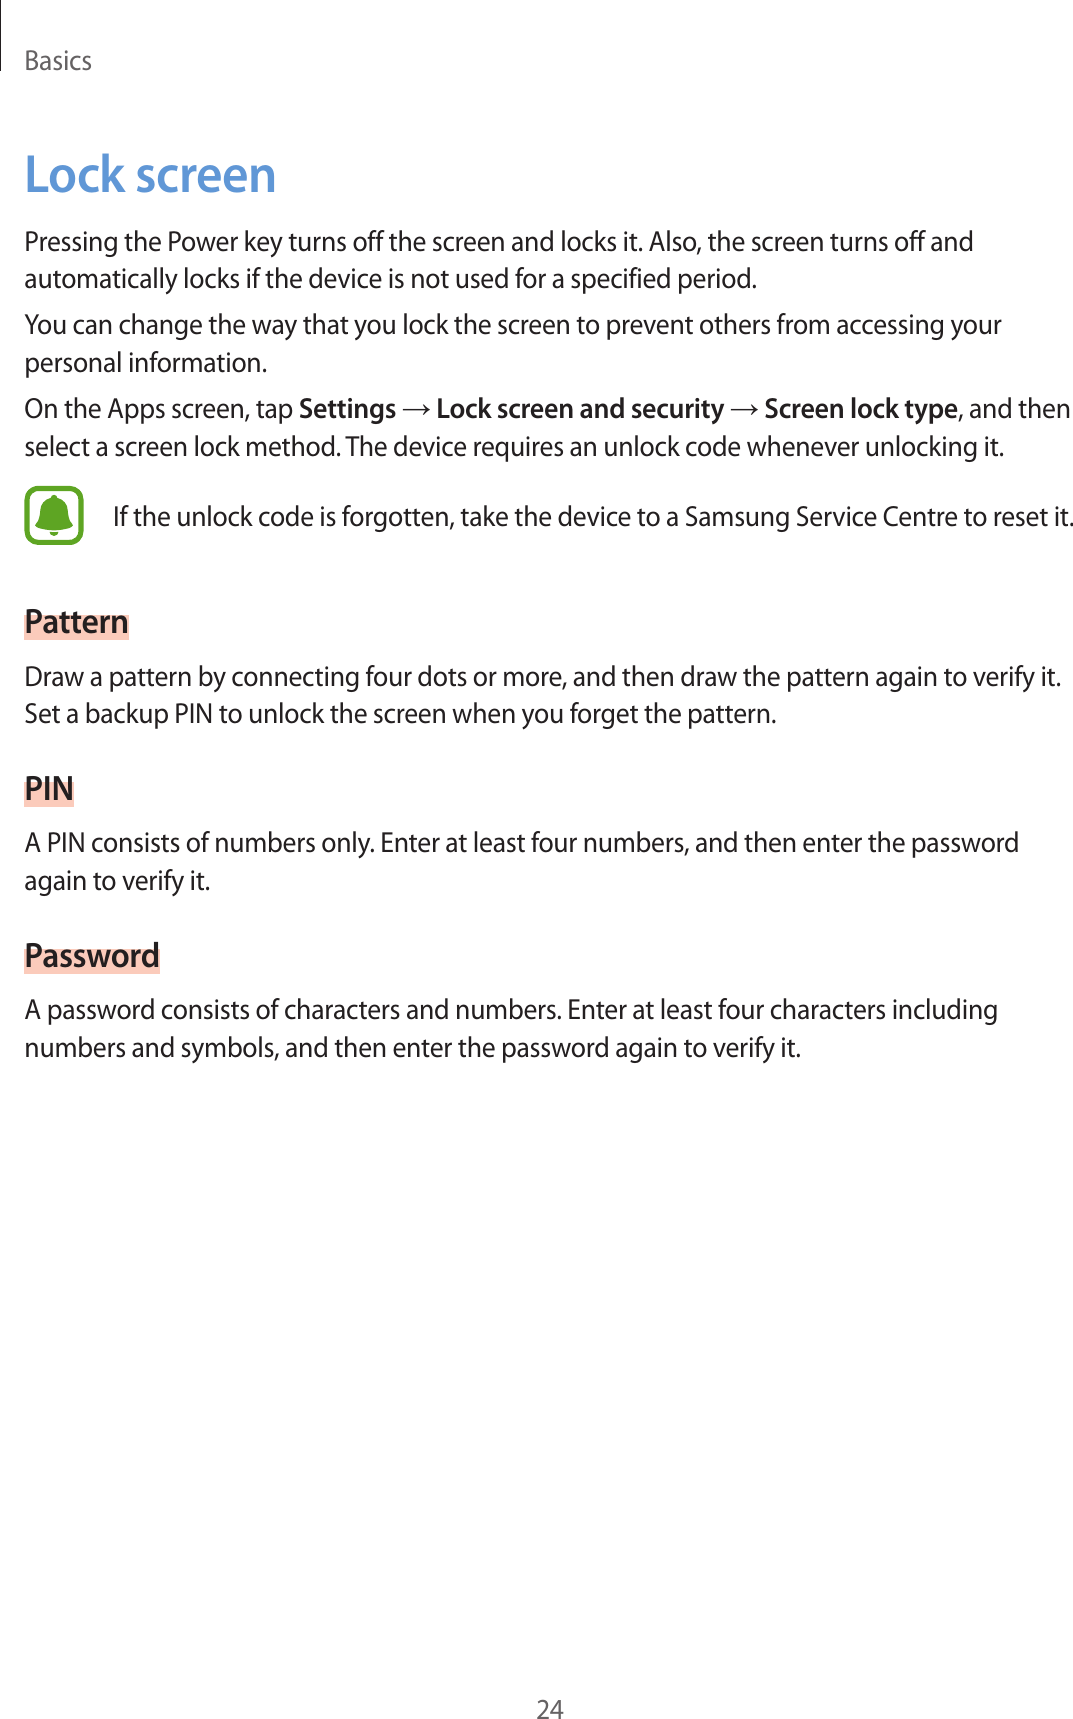 Basics24Lock screenPressing the Power key turns off the screen and locks it. Also, the screen turns off and automatically locks if the device is not used for a specified period.You can change the way that you lock the screen to prevent others from accessing your personal information.On the Apps screen, tap Settings → Lock screen and security → Screen lock type, and then select a screen lock method. The device requires an unlock code whenever unlocking it.If the unlock code is forgotten, take the device to a Samsung Service Centre to reset it.PatternDraw a pattern by connecting four dots or more, and then draw the pattern again to verify it. Set a backup PIN to unlock the screen when you forget the pattern.PINA PIN consists of numbers only. Enter at least four numbers, and then enter the password again to verify it.PasswordA password consists of characters and numbers. Enter at least four characters including numbers and symbols, and then enter the password again to verify it.